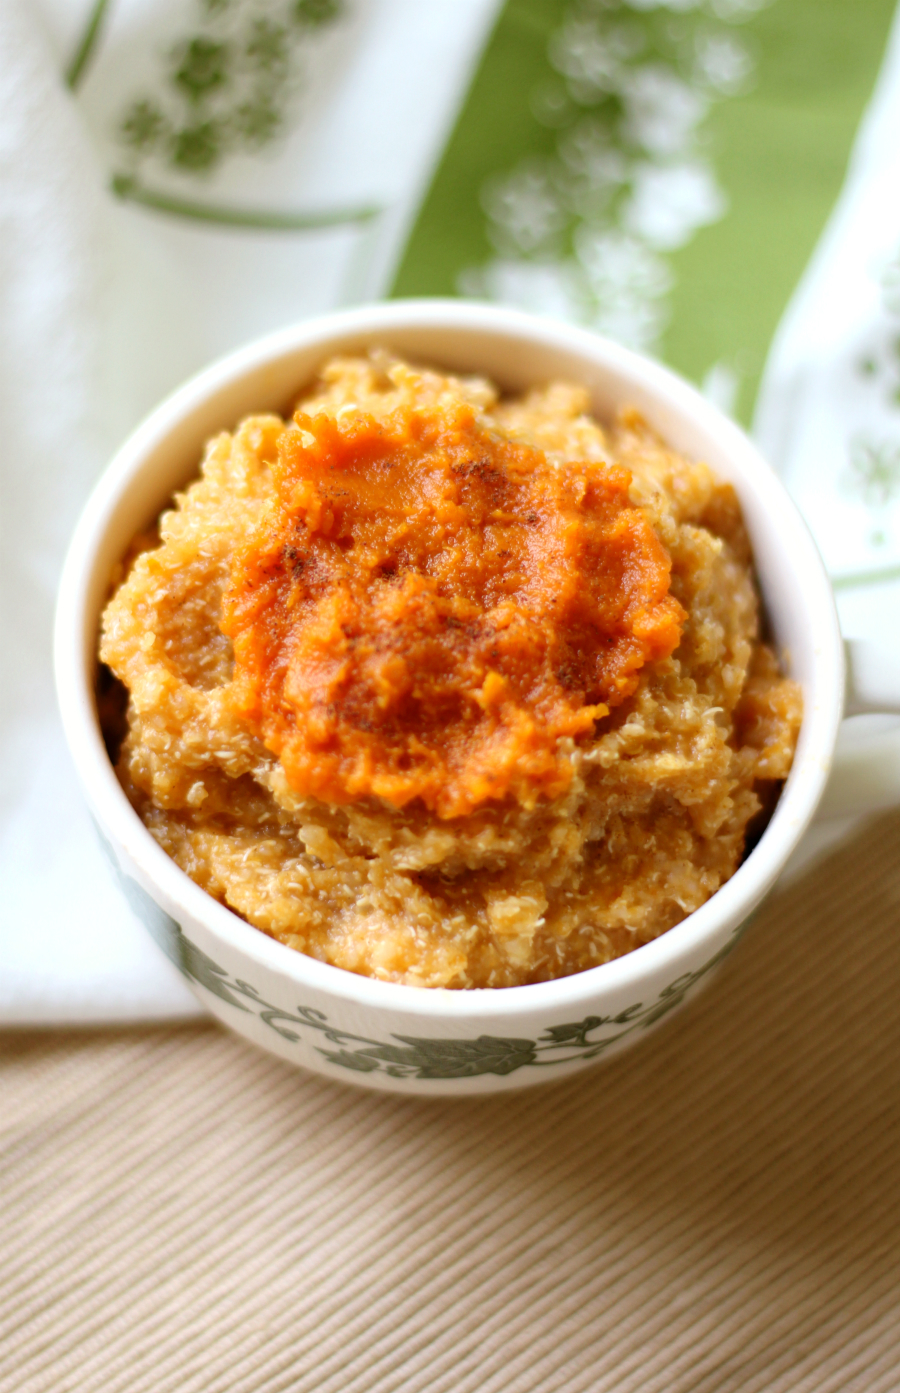 Pumpkin Pie Quinoa Flakes | Strength and Sunshine @RebeccaGF666 A delicious seasonal bowl of protein-packed Pumpkin Pie Quinoa Flakes for a fantastic breakfast for one! Gluten-free, vegan, and allergy-free, this comforting recipe will power you through all those cold weather mornings with lasting energy!